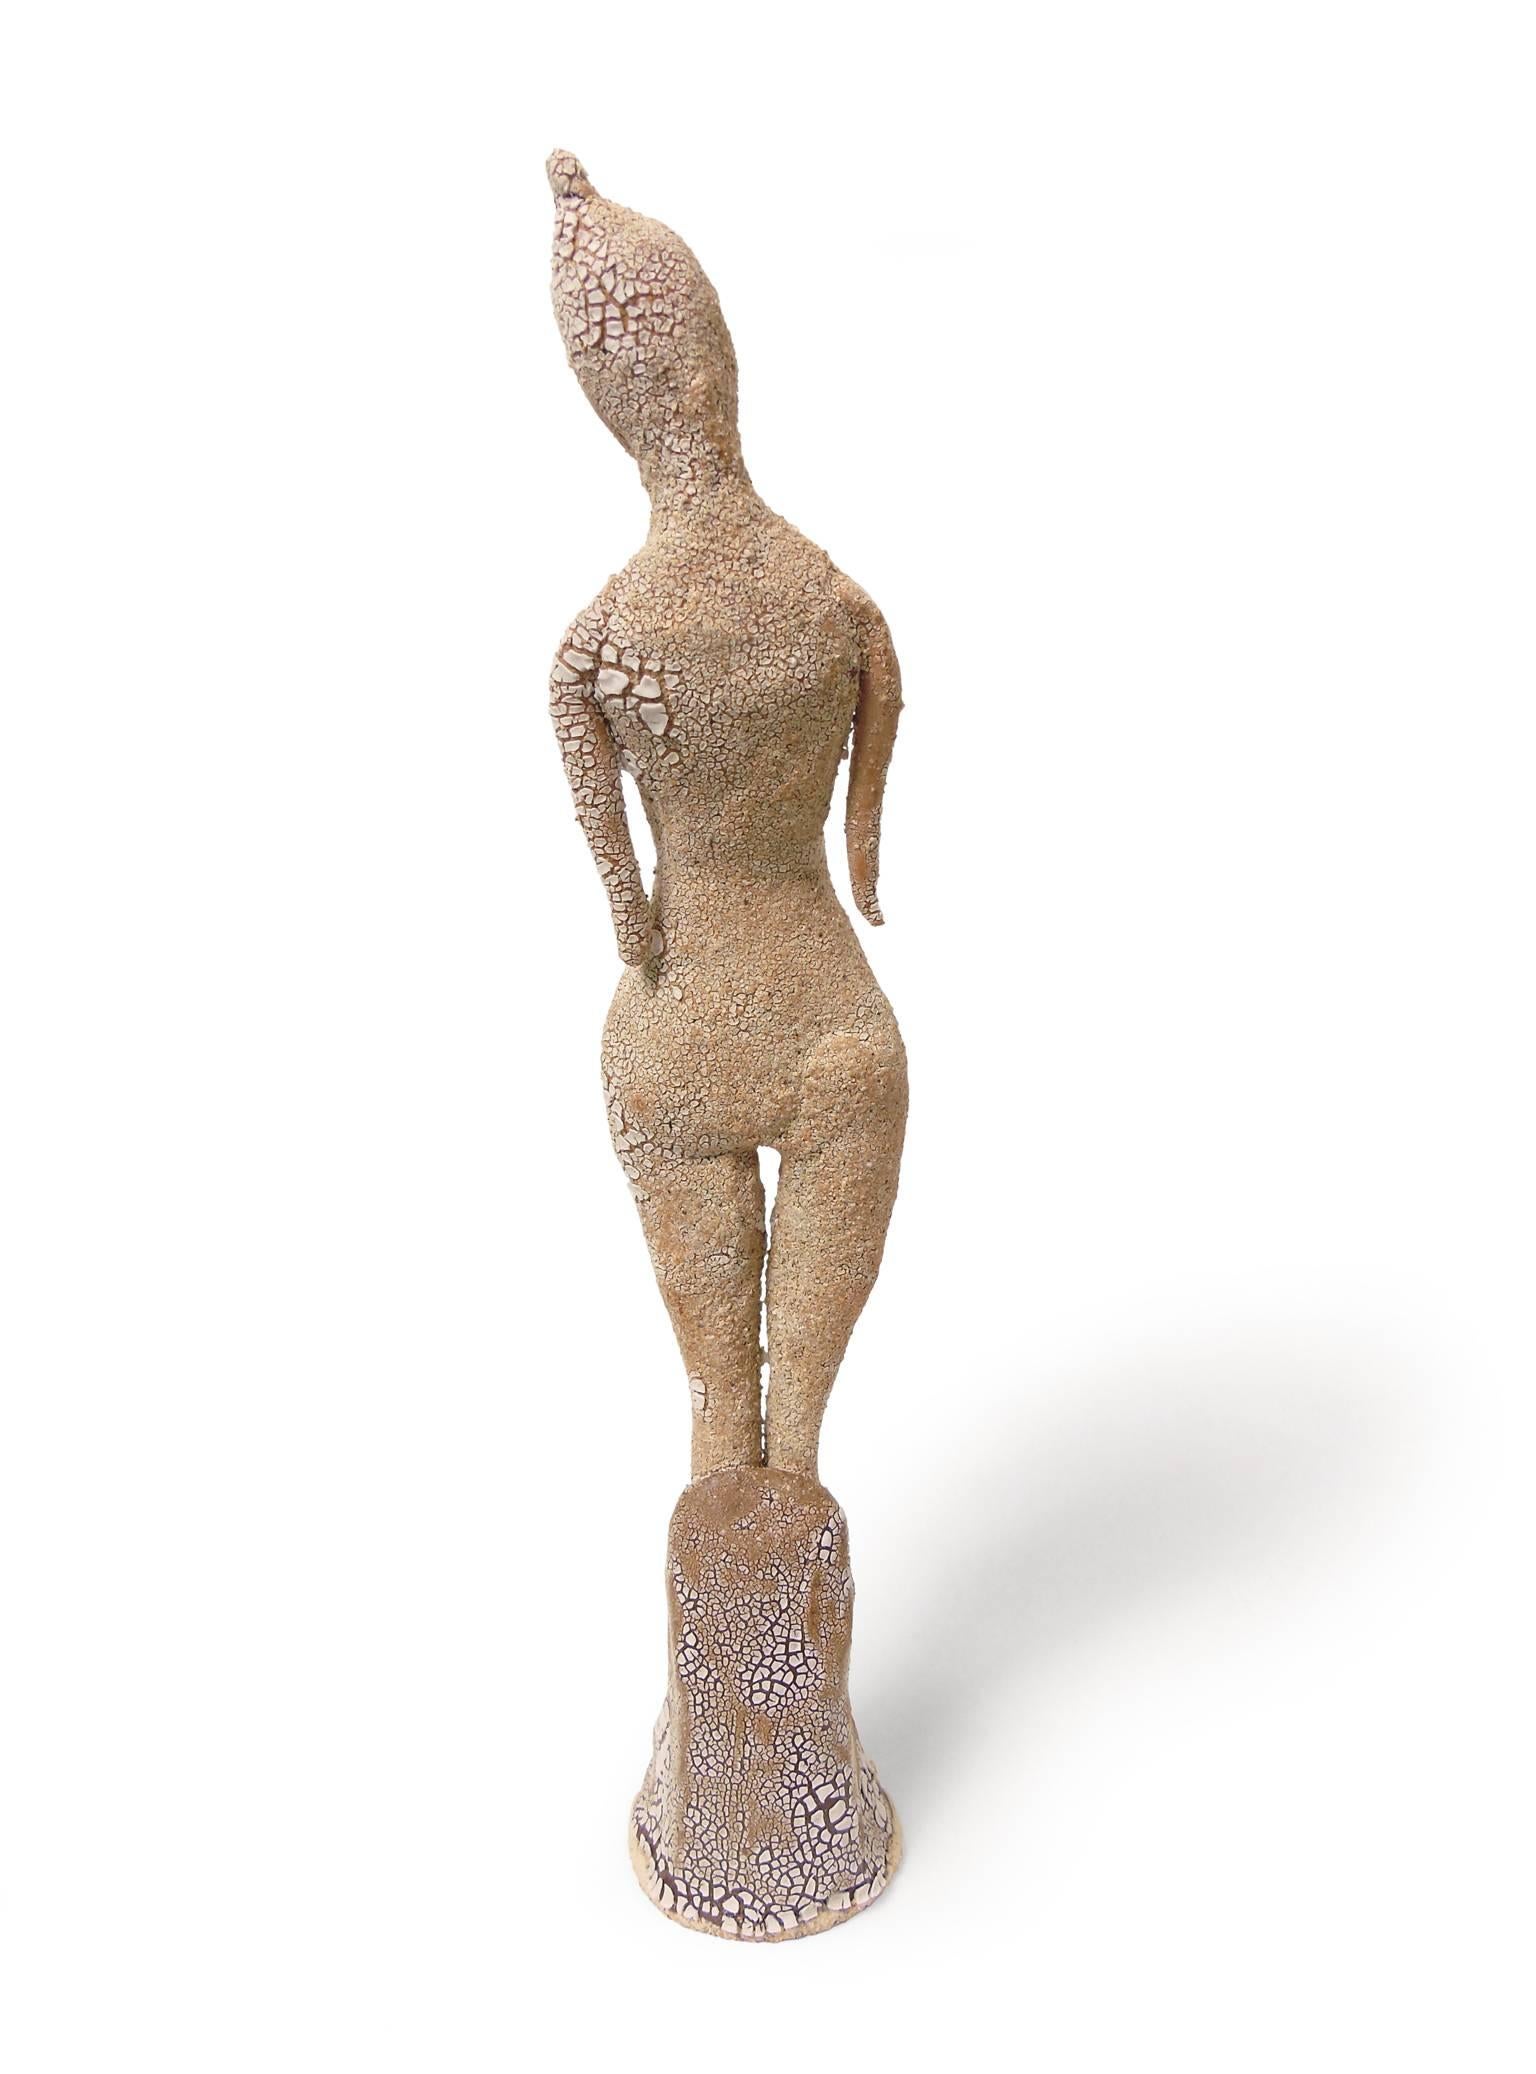 An eroded form and crackled surface add mystique to Standing Goddess by Robin Whiteman. This female figure is off-kilter. Her hands are missing and the white glaze is crackled to the point of looking sand-like. Robin Whiteman is known for her